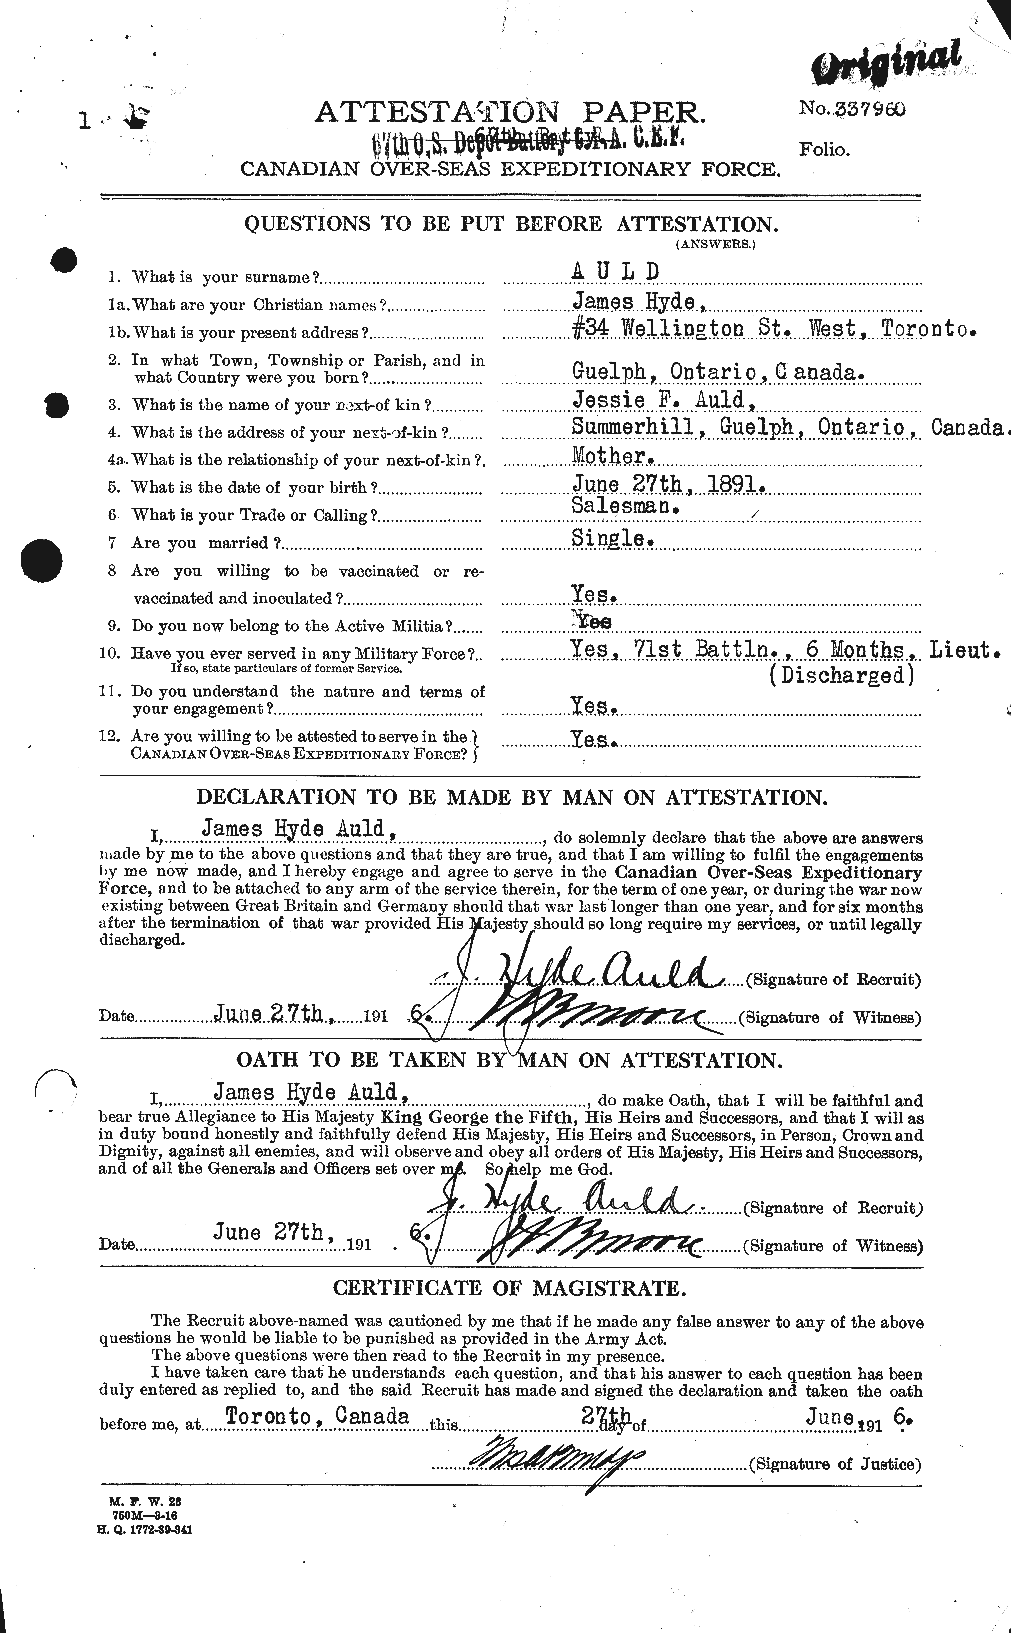 Personnel Records of the First World War - CEF 224267a